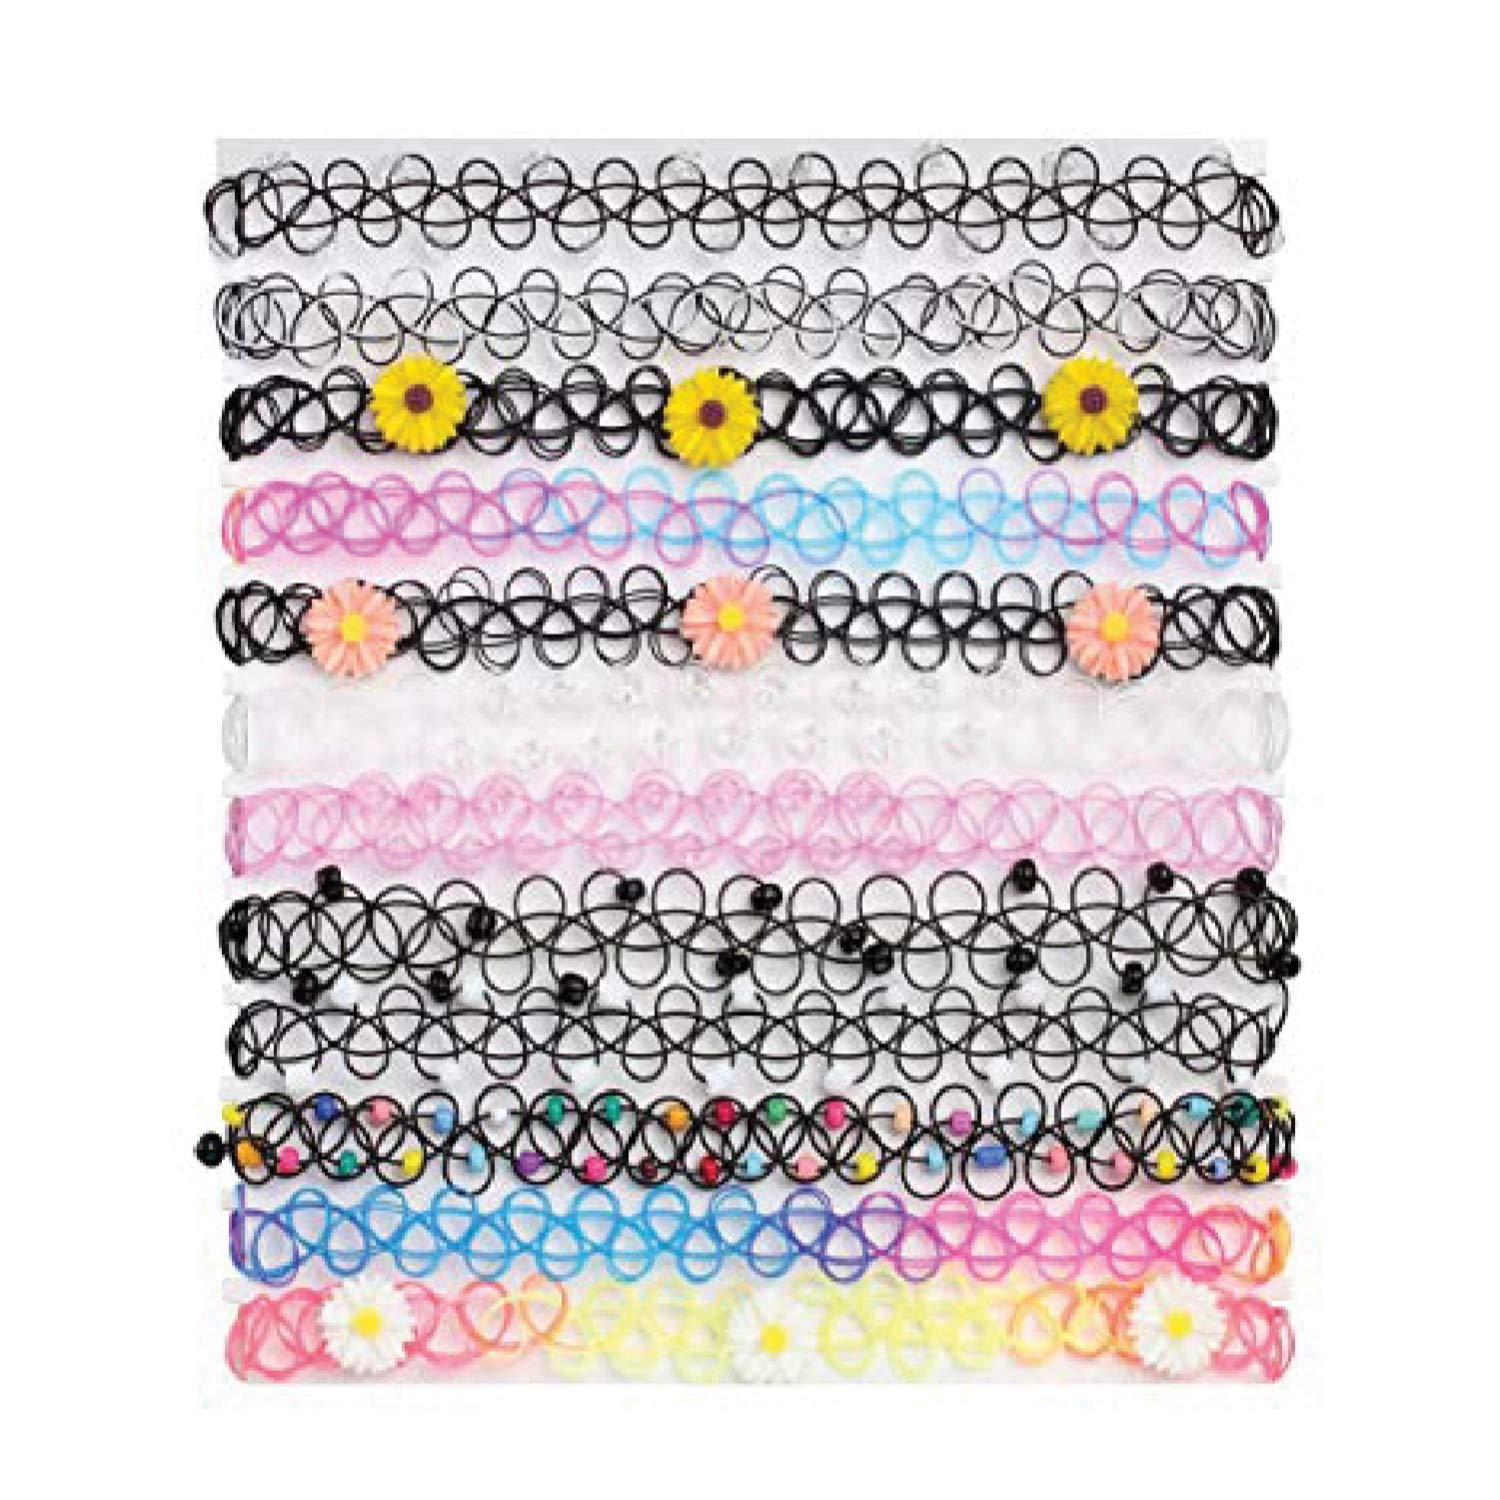 BodyJ4You 24PC Tattoo Choker Necklace Set - 90s Accessories Women Teen Girls Kids - Flower Charms Rainbow Multicolor Stretchy Jewelry - Summer Style Gift Idea